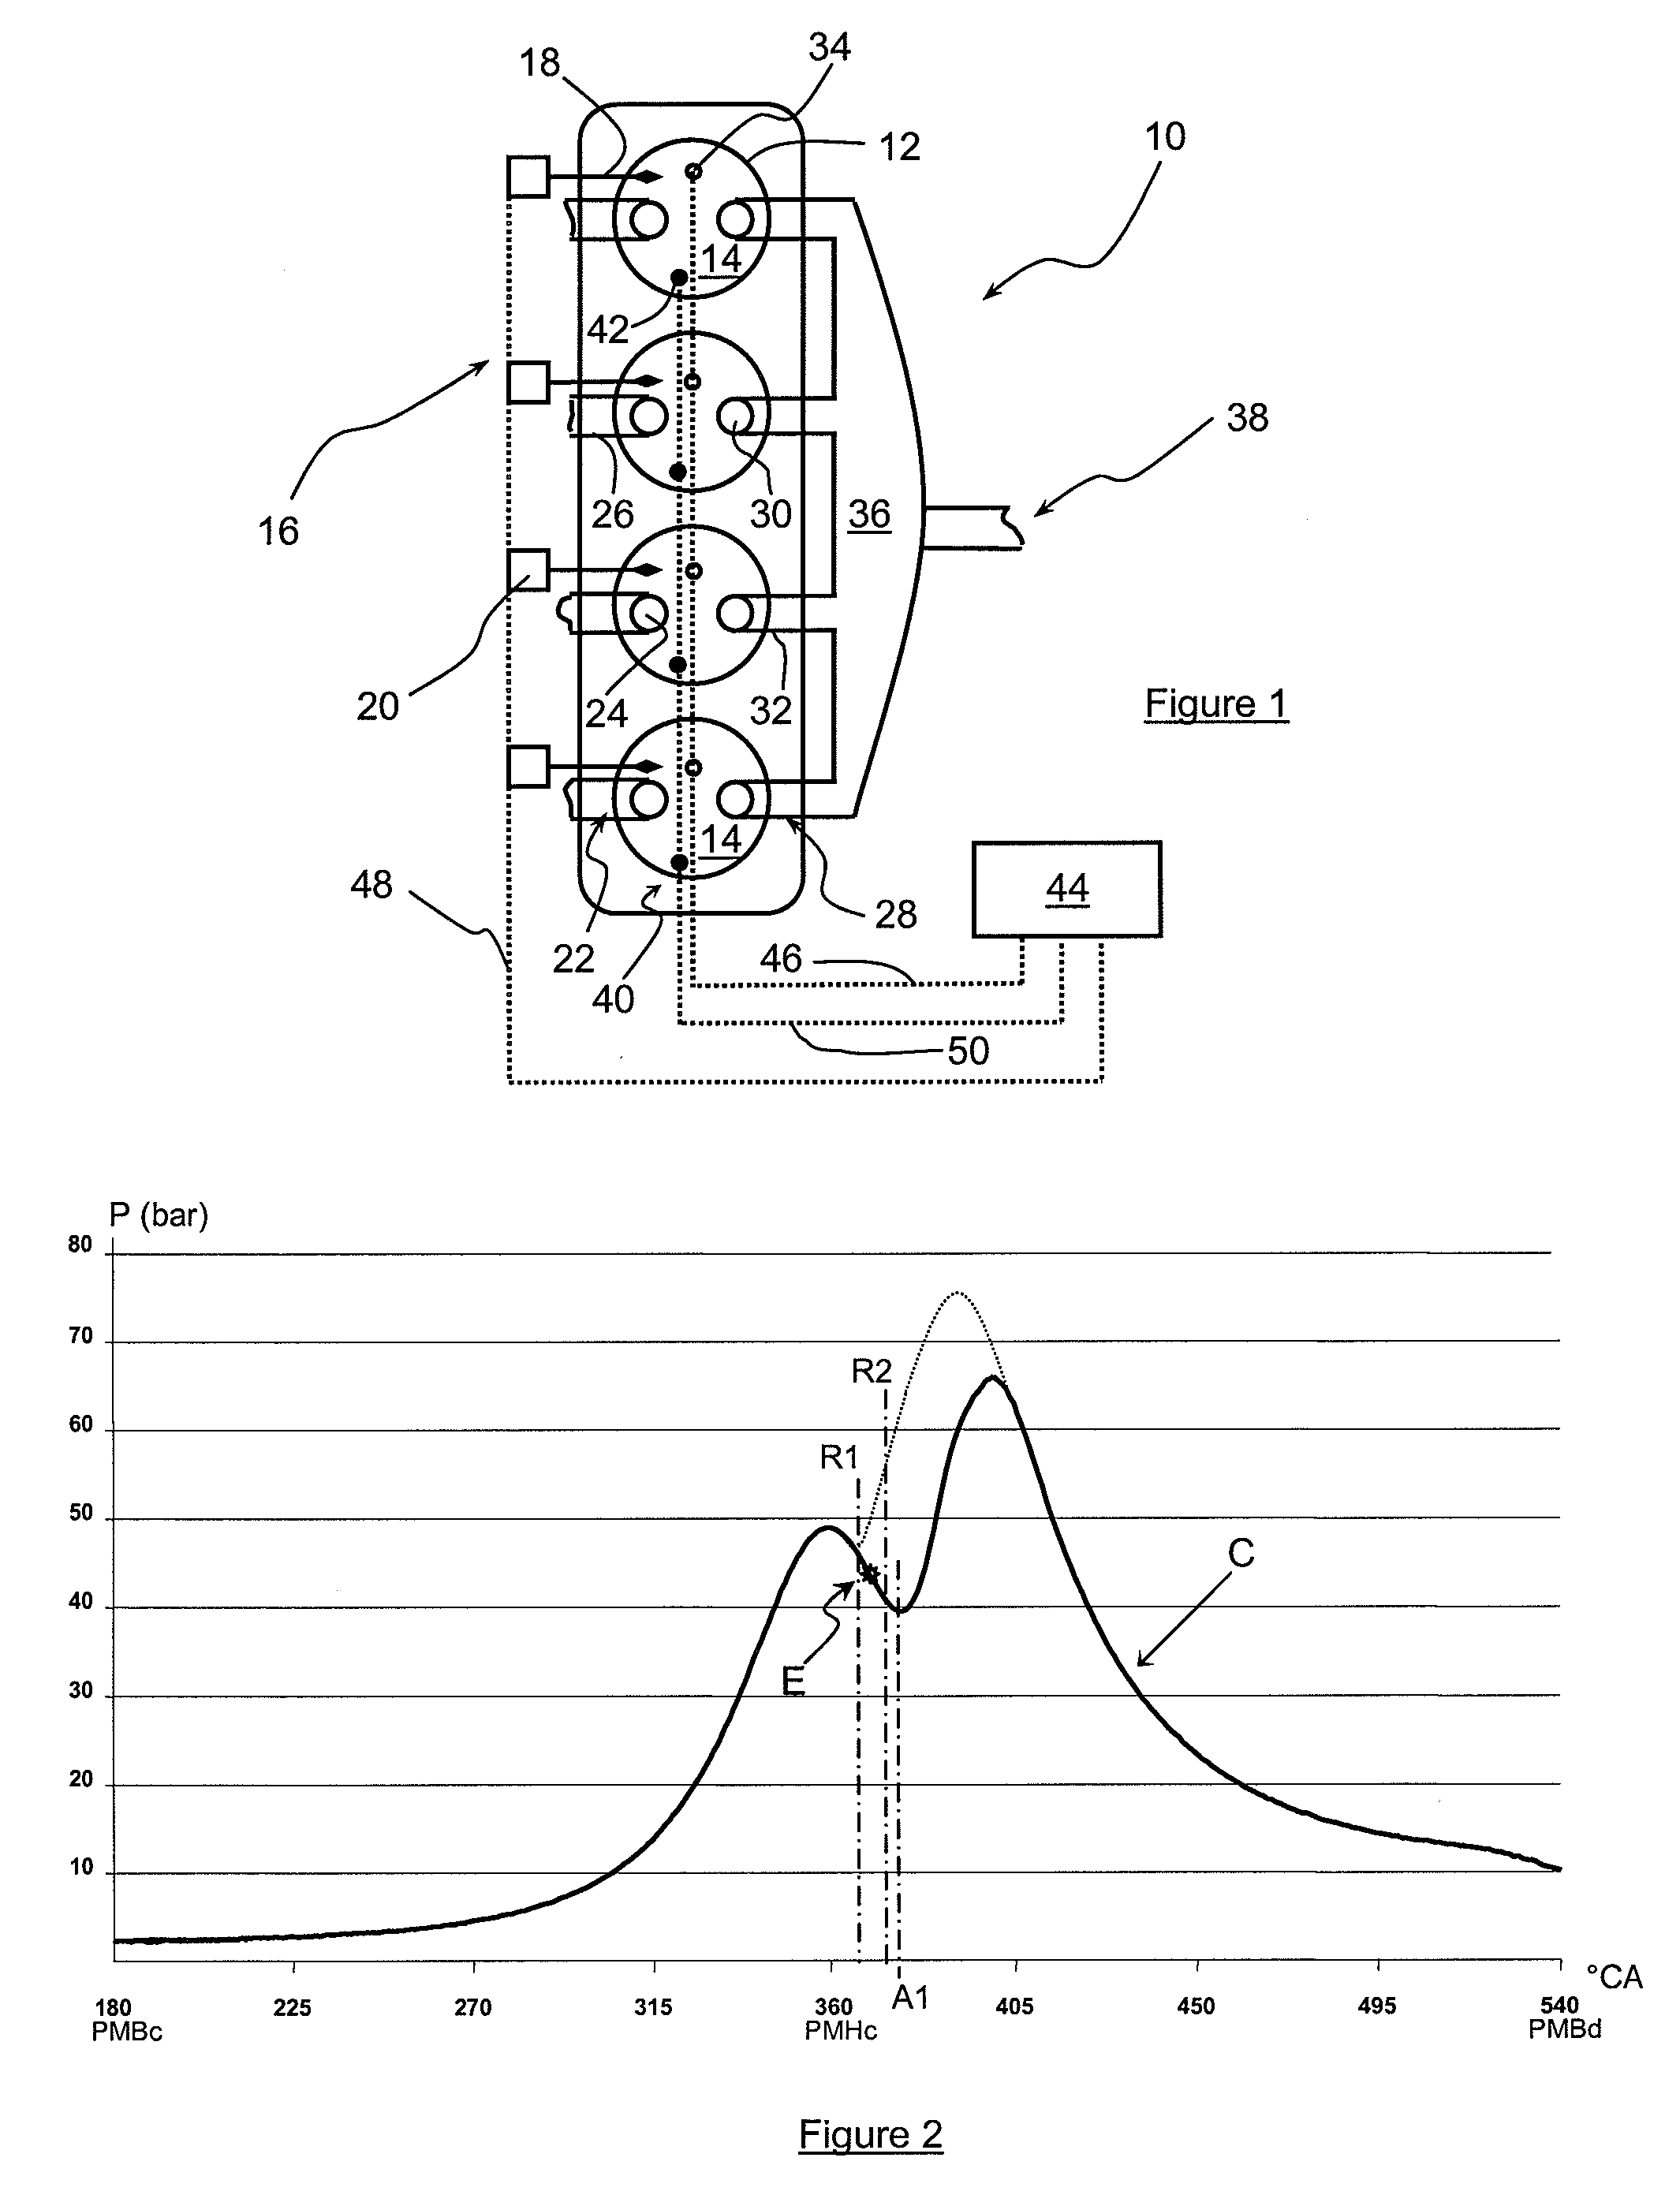 Method of controlling the combustion phase of an internal-combustion engine, notably a gasoline type direct-injection supercharged engine